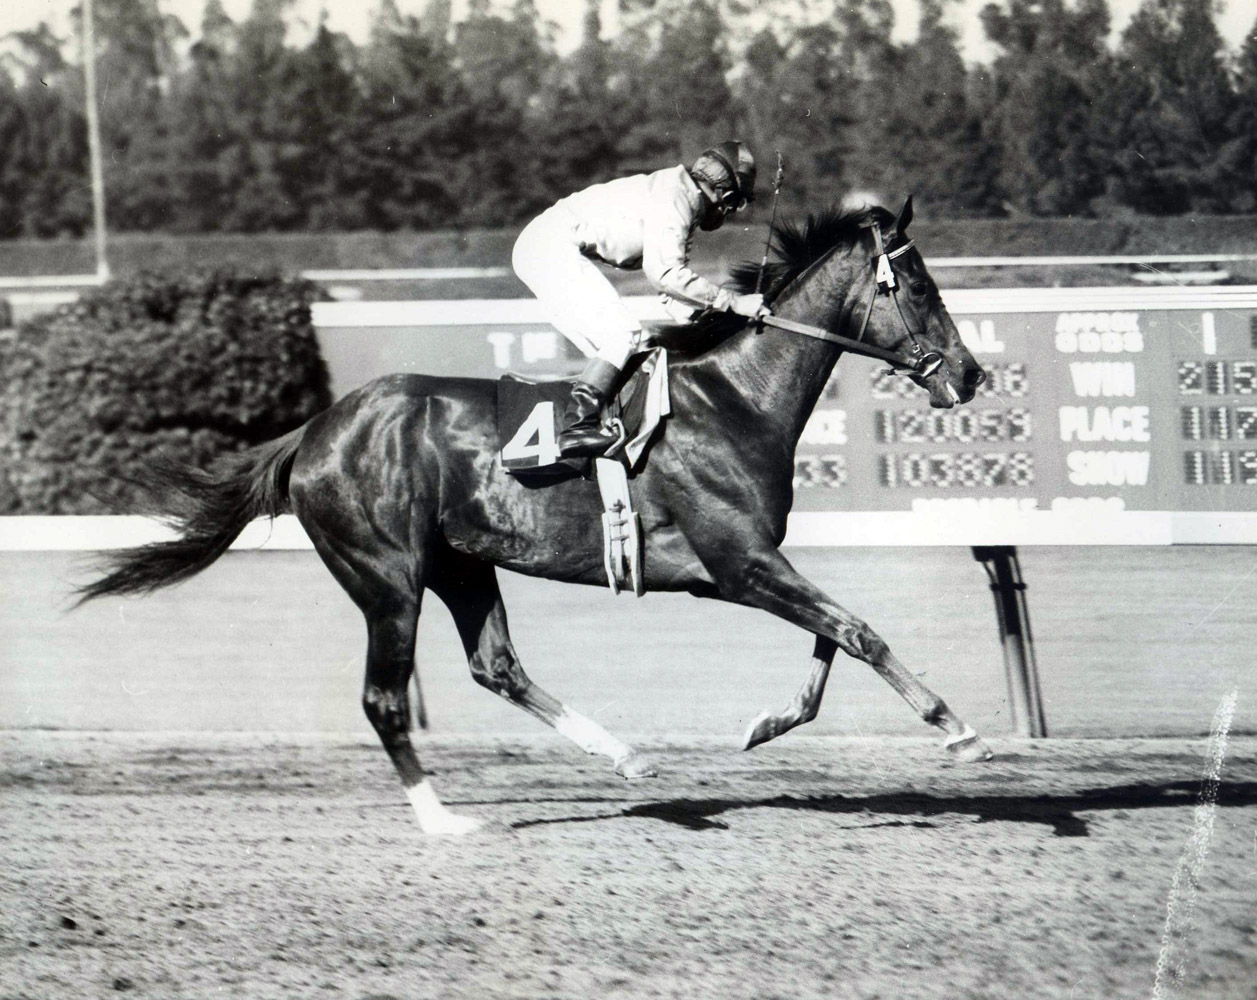 Bill Boland and Silver Spoon winning the 1959 Cinema Handicap at Hollywood Park (Museum Collection)